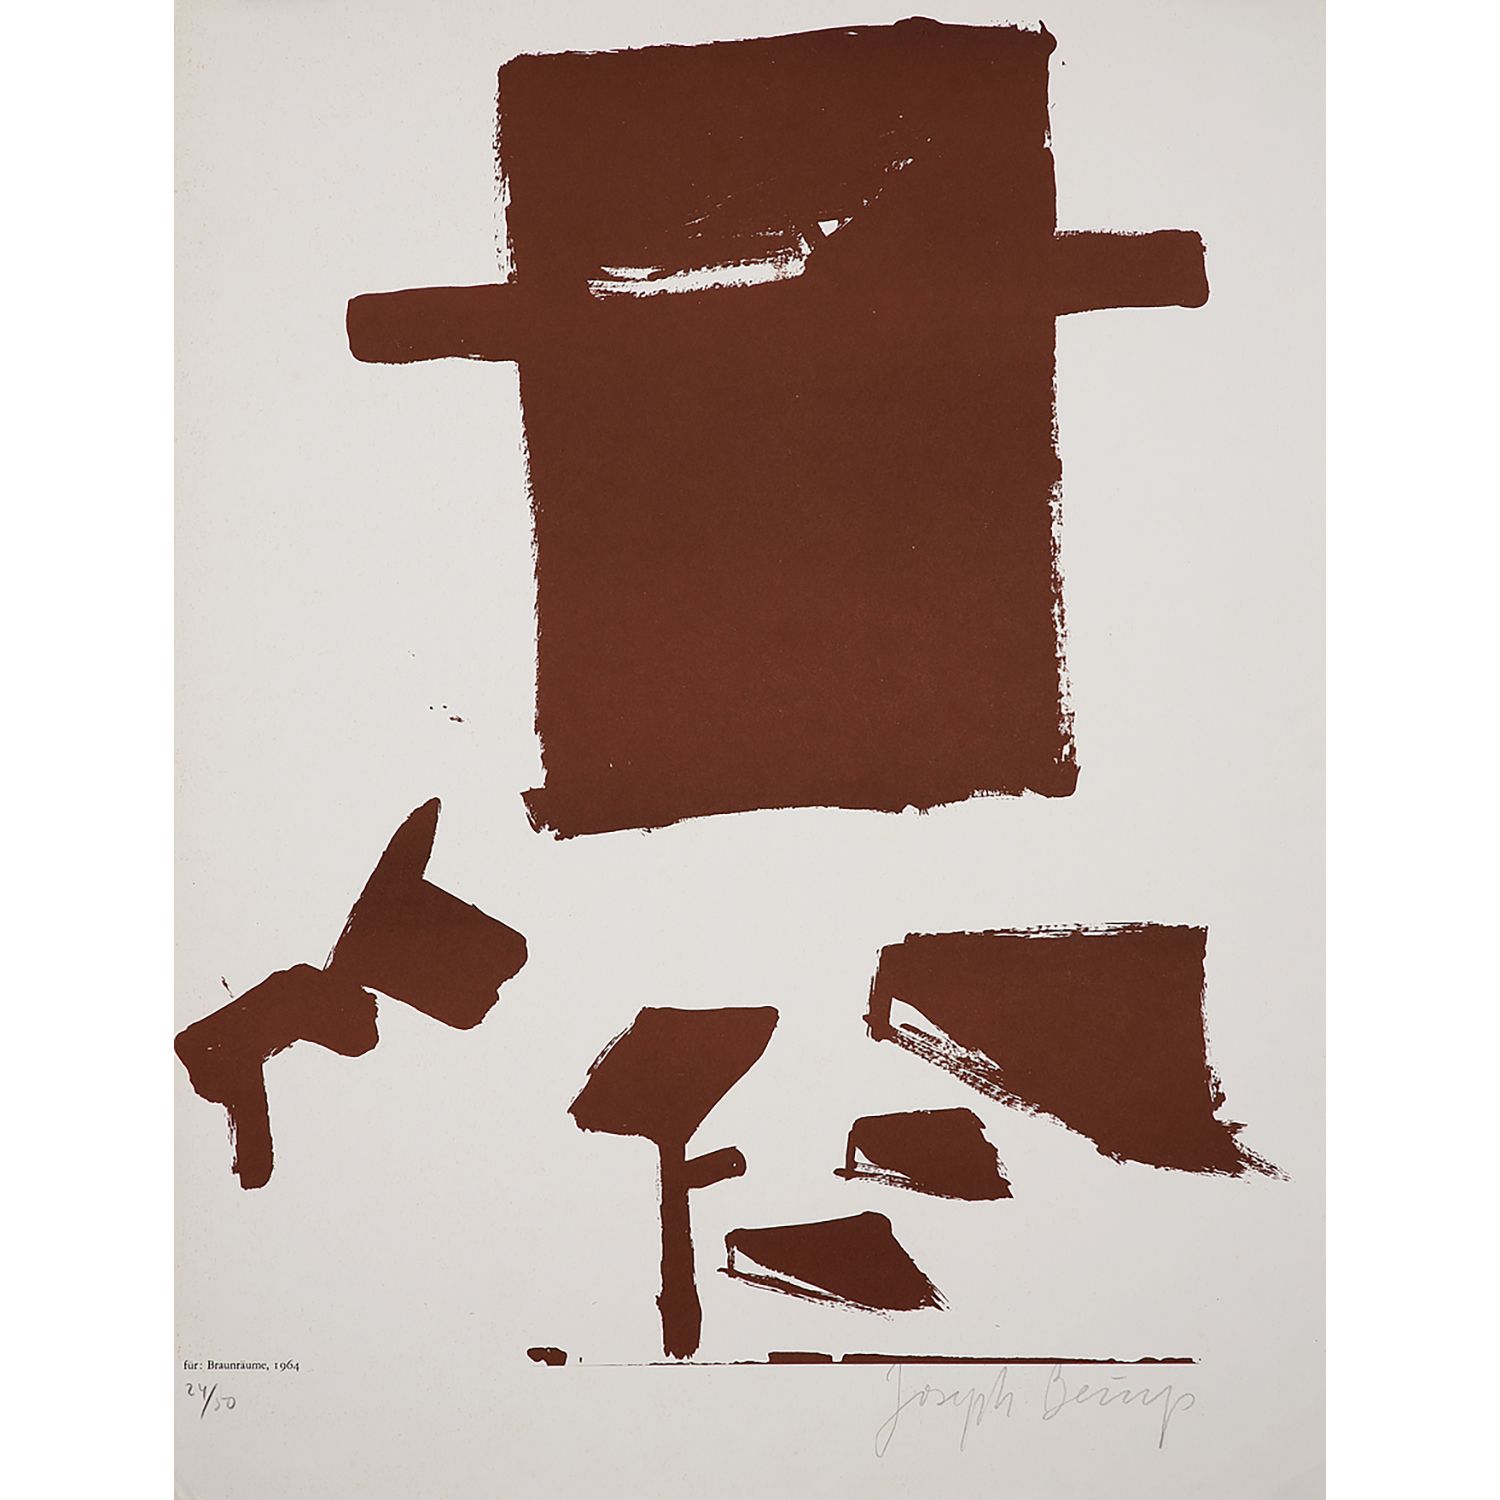 JOSEPH BEUYS (1921-1986) JOSEPH BEUYS (1921-1986)
COMPOSITION
Lithograph in colo&hellip;